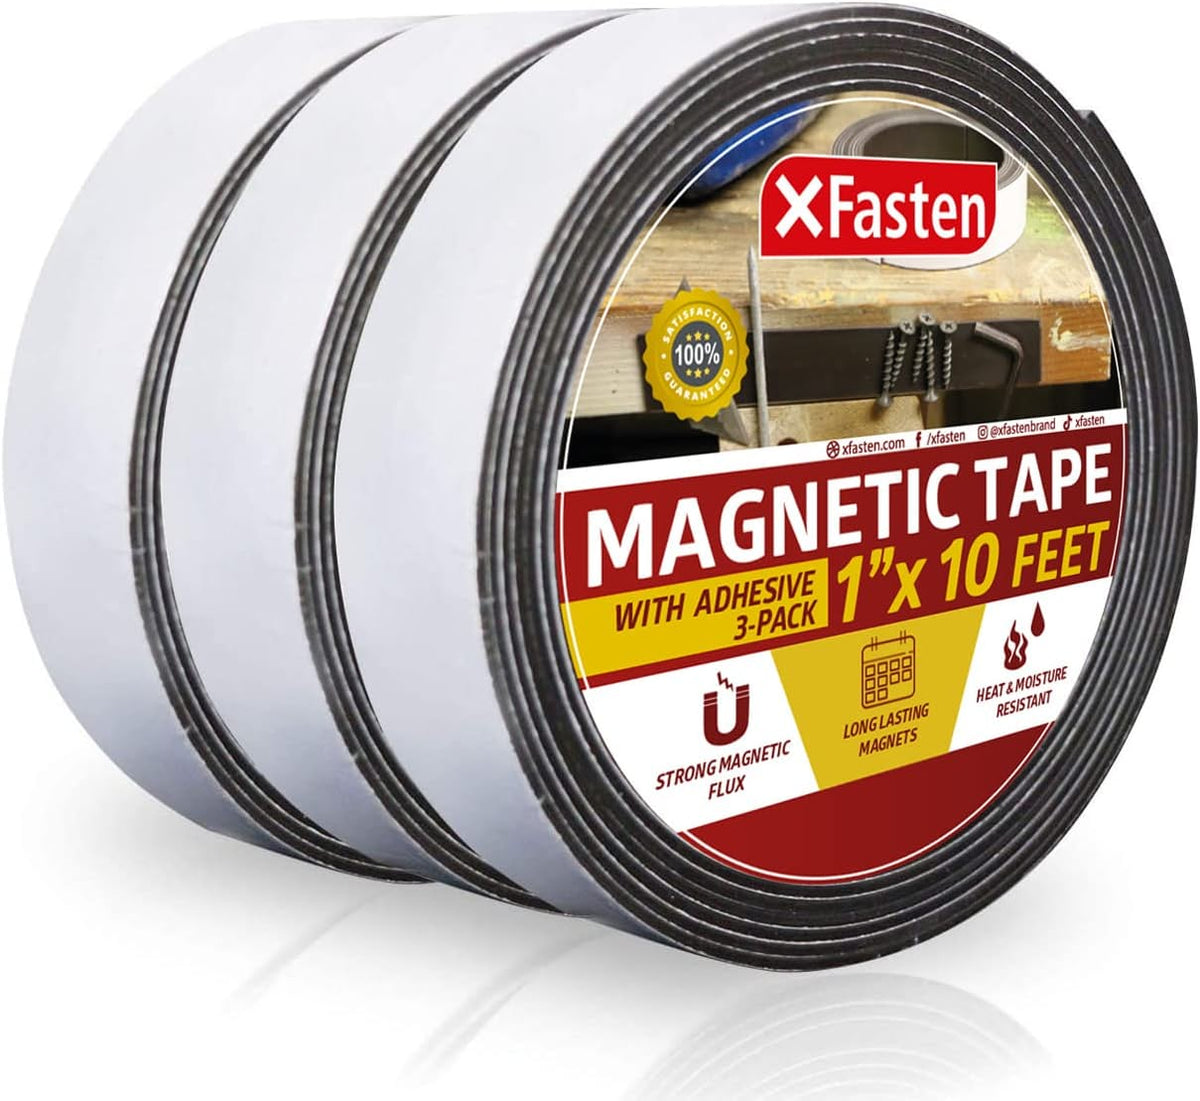 XFasten Magnetic Tape 1x10' Pack of 3